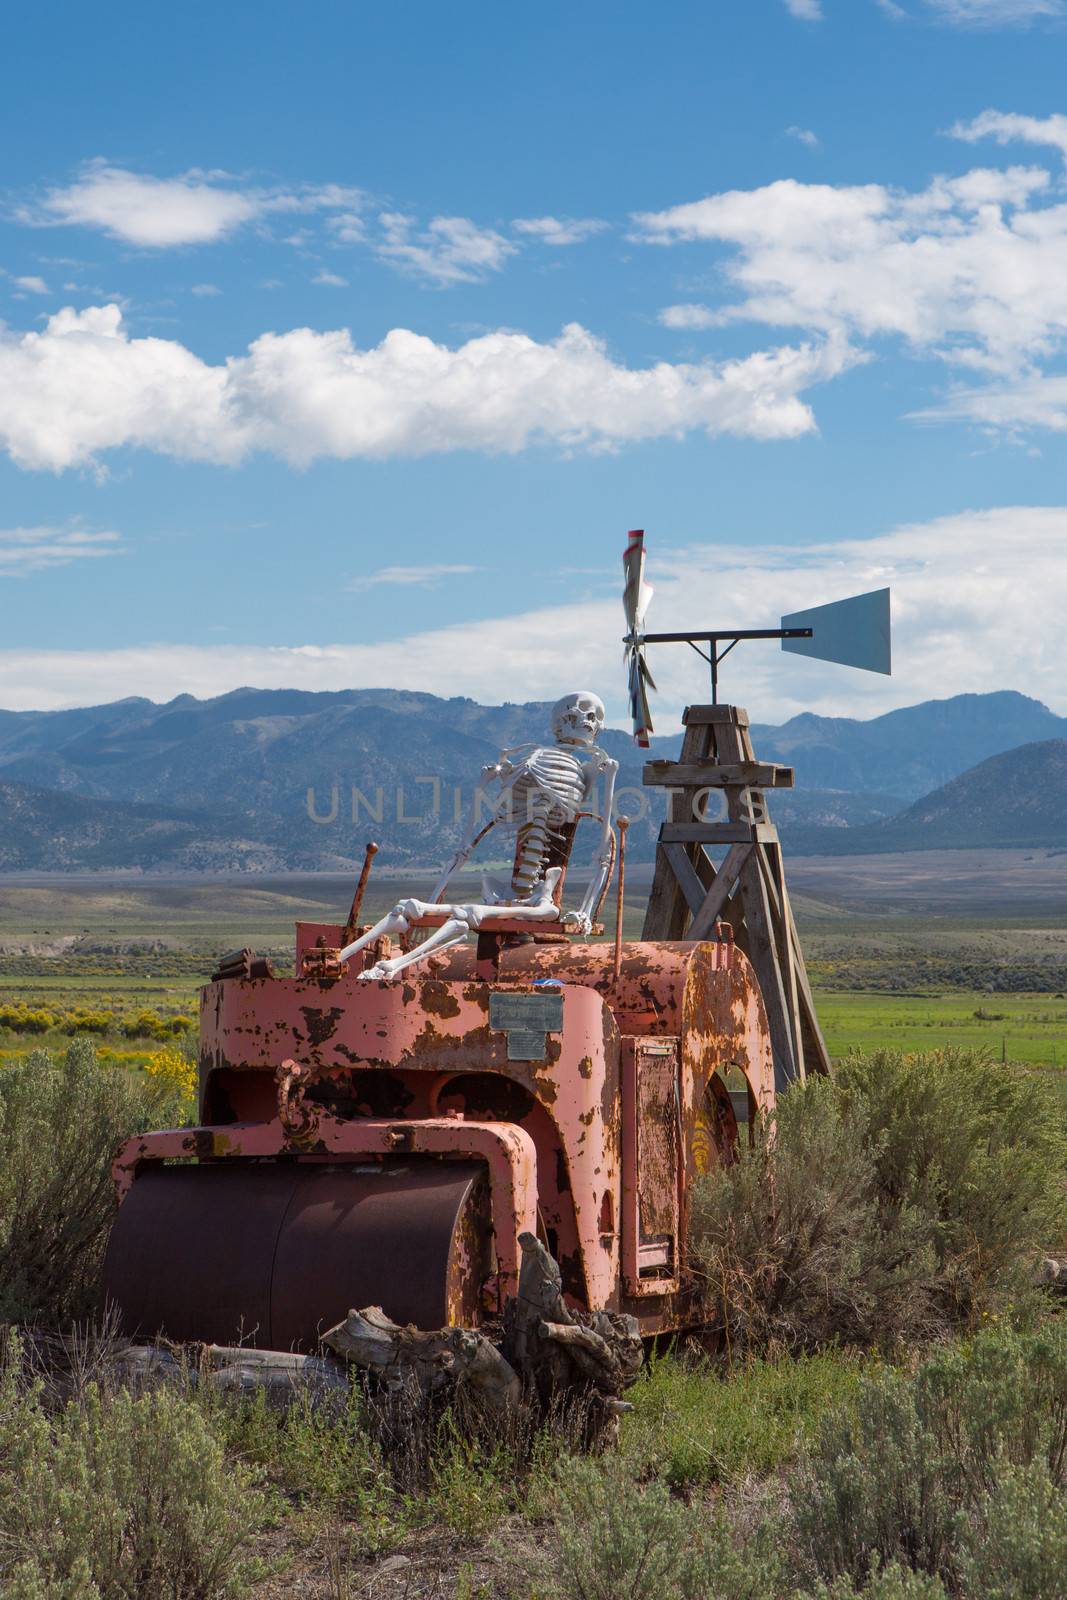 Skeleton sitting on a vintage tractor in Utah with mountains in the background.